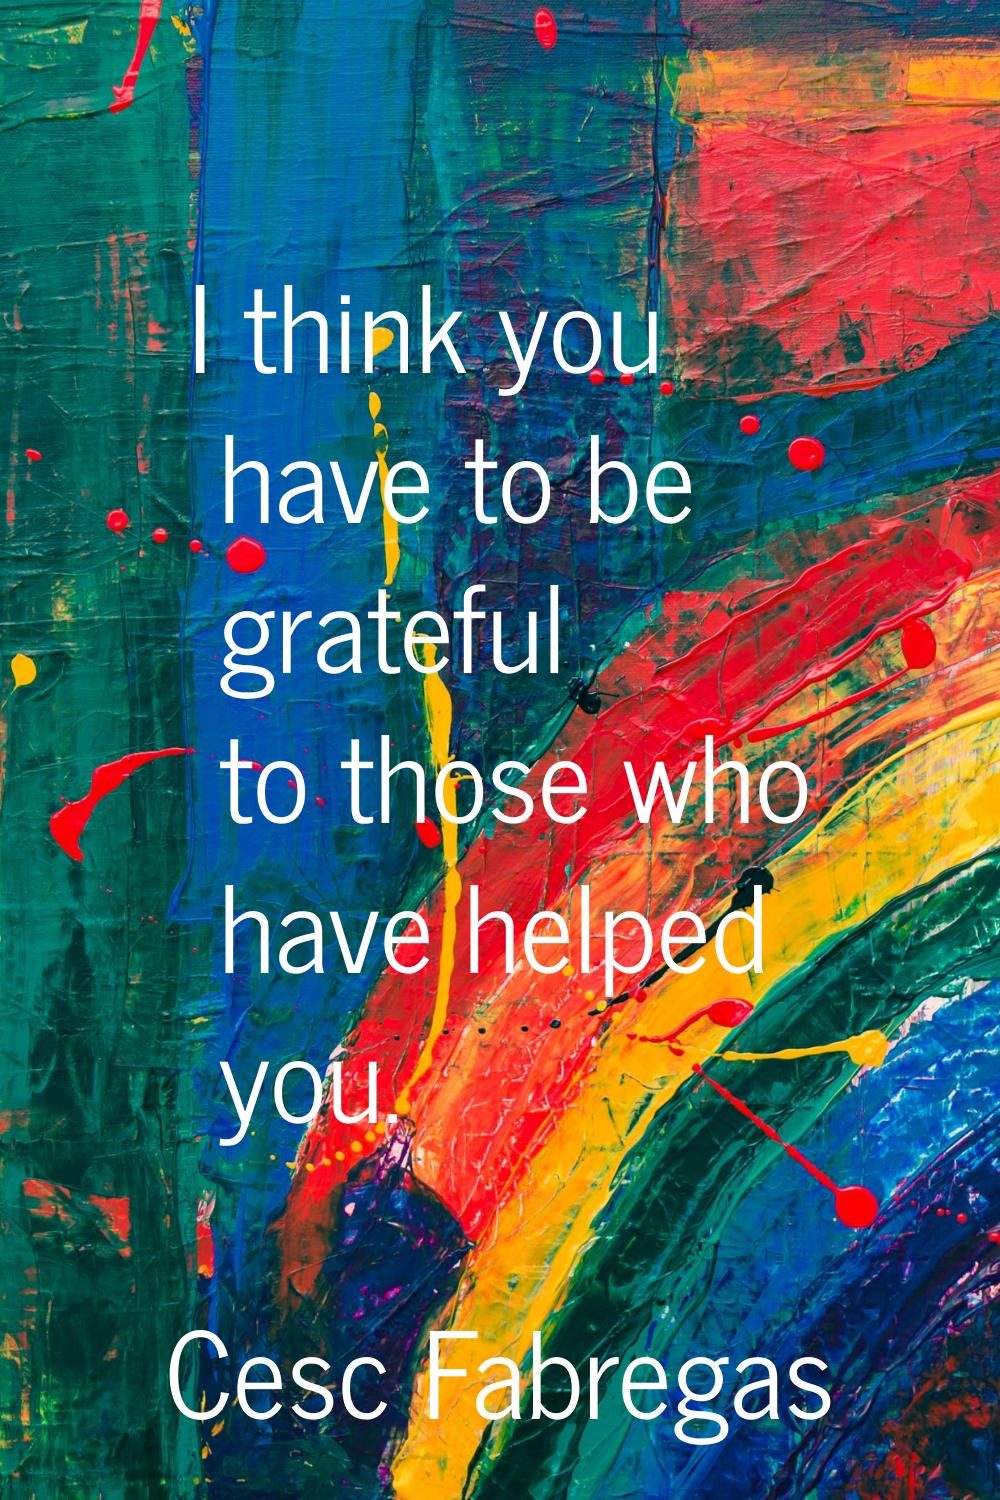 I think you have to be grateful to those who have helped you.